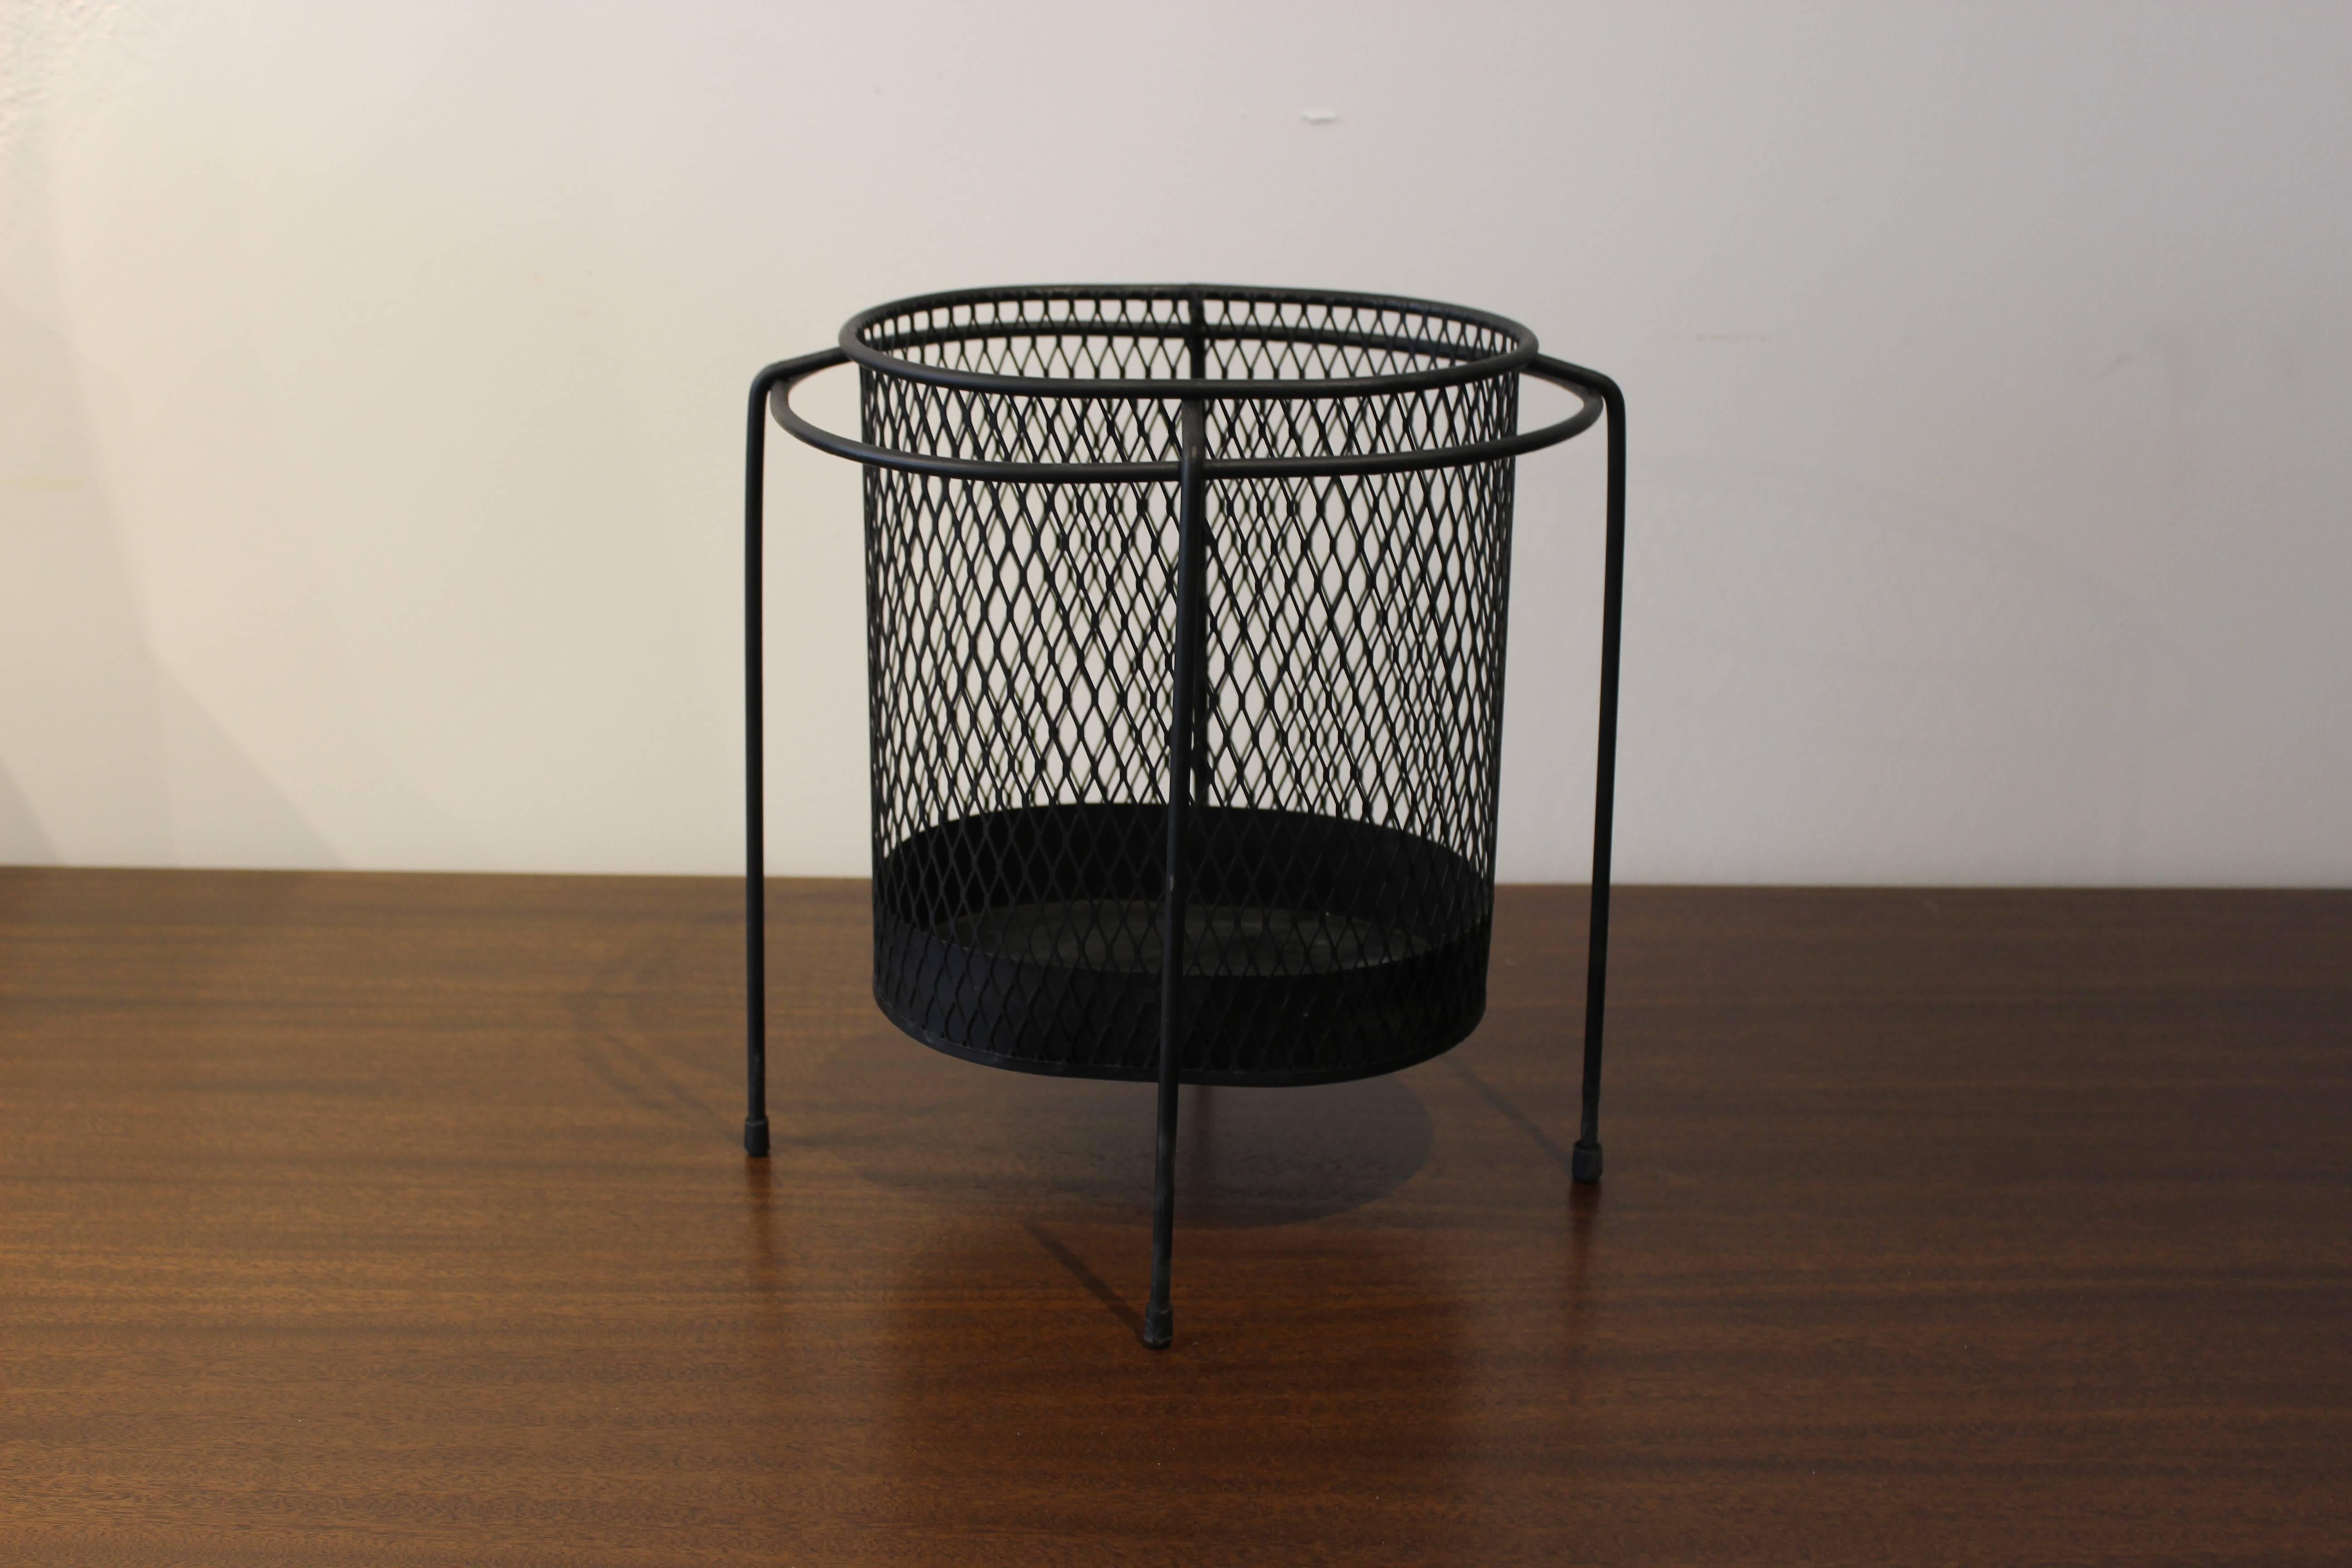 Sculptural wrought iron and wire waste basket or trash can, midcentury French Modernism, in the style of Mategot.


Whether furnishing a contemporary Soho loft or stylish post-war Park Avenue penthouse, an artistic Central Park townhome or your